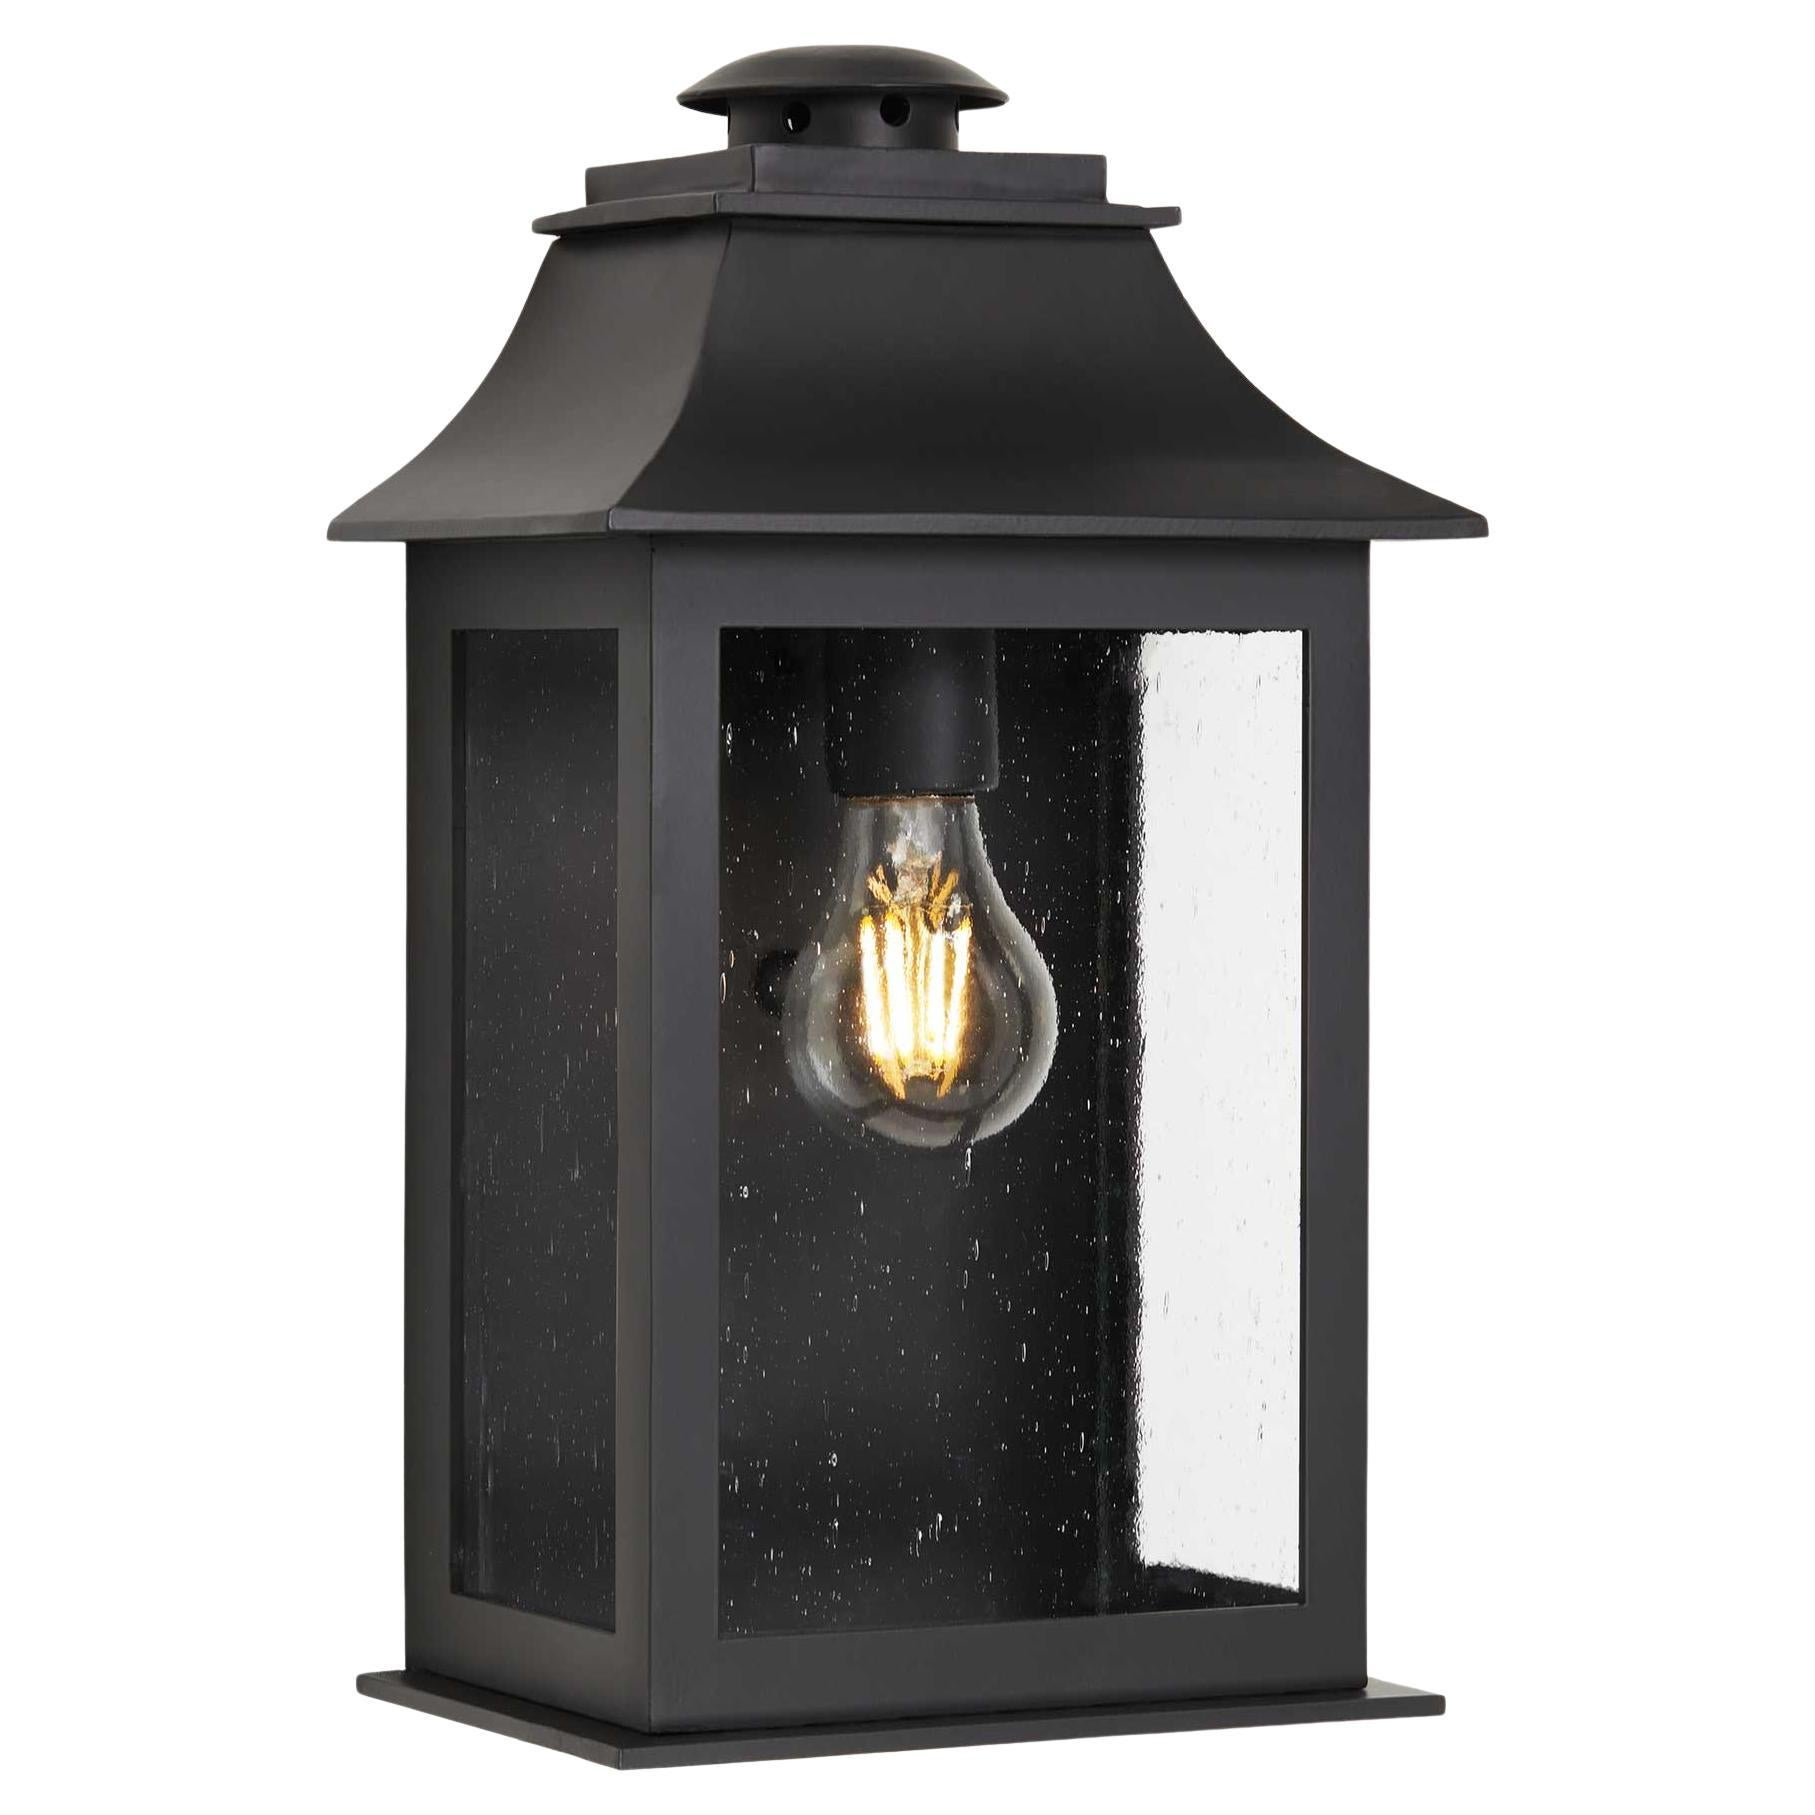 The Bridgeport lantern references both old and new with classic features with modern lines and open glass panels.

Lantern shown in SBLC Grey Finish with SBLC Premium Seeded Glass. 

Hand-forged in heavy gauge wrought iron. All lanterns go through a